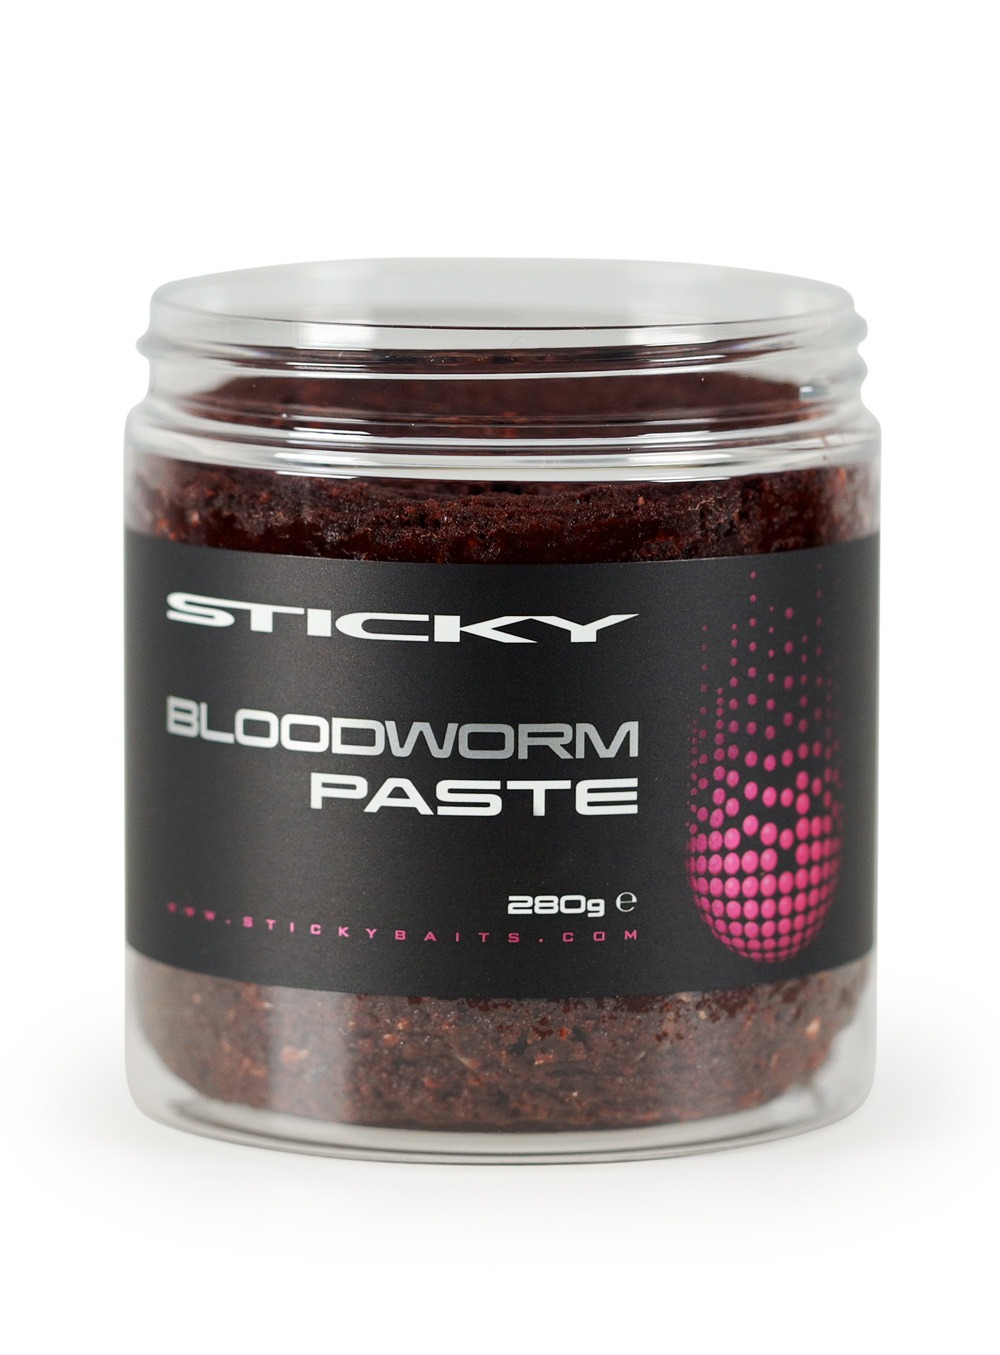 Sticky Baits - Products - Bloodworm Paste - Carp Fishing Bait